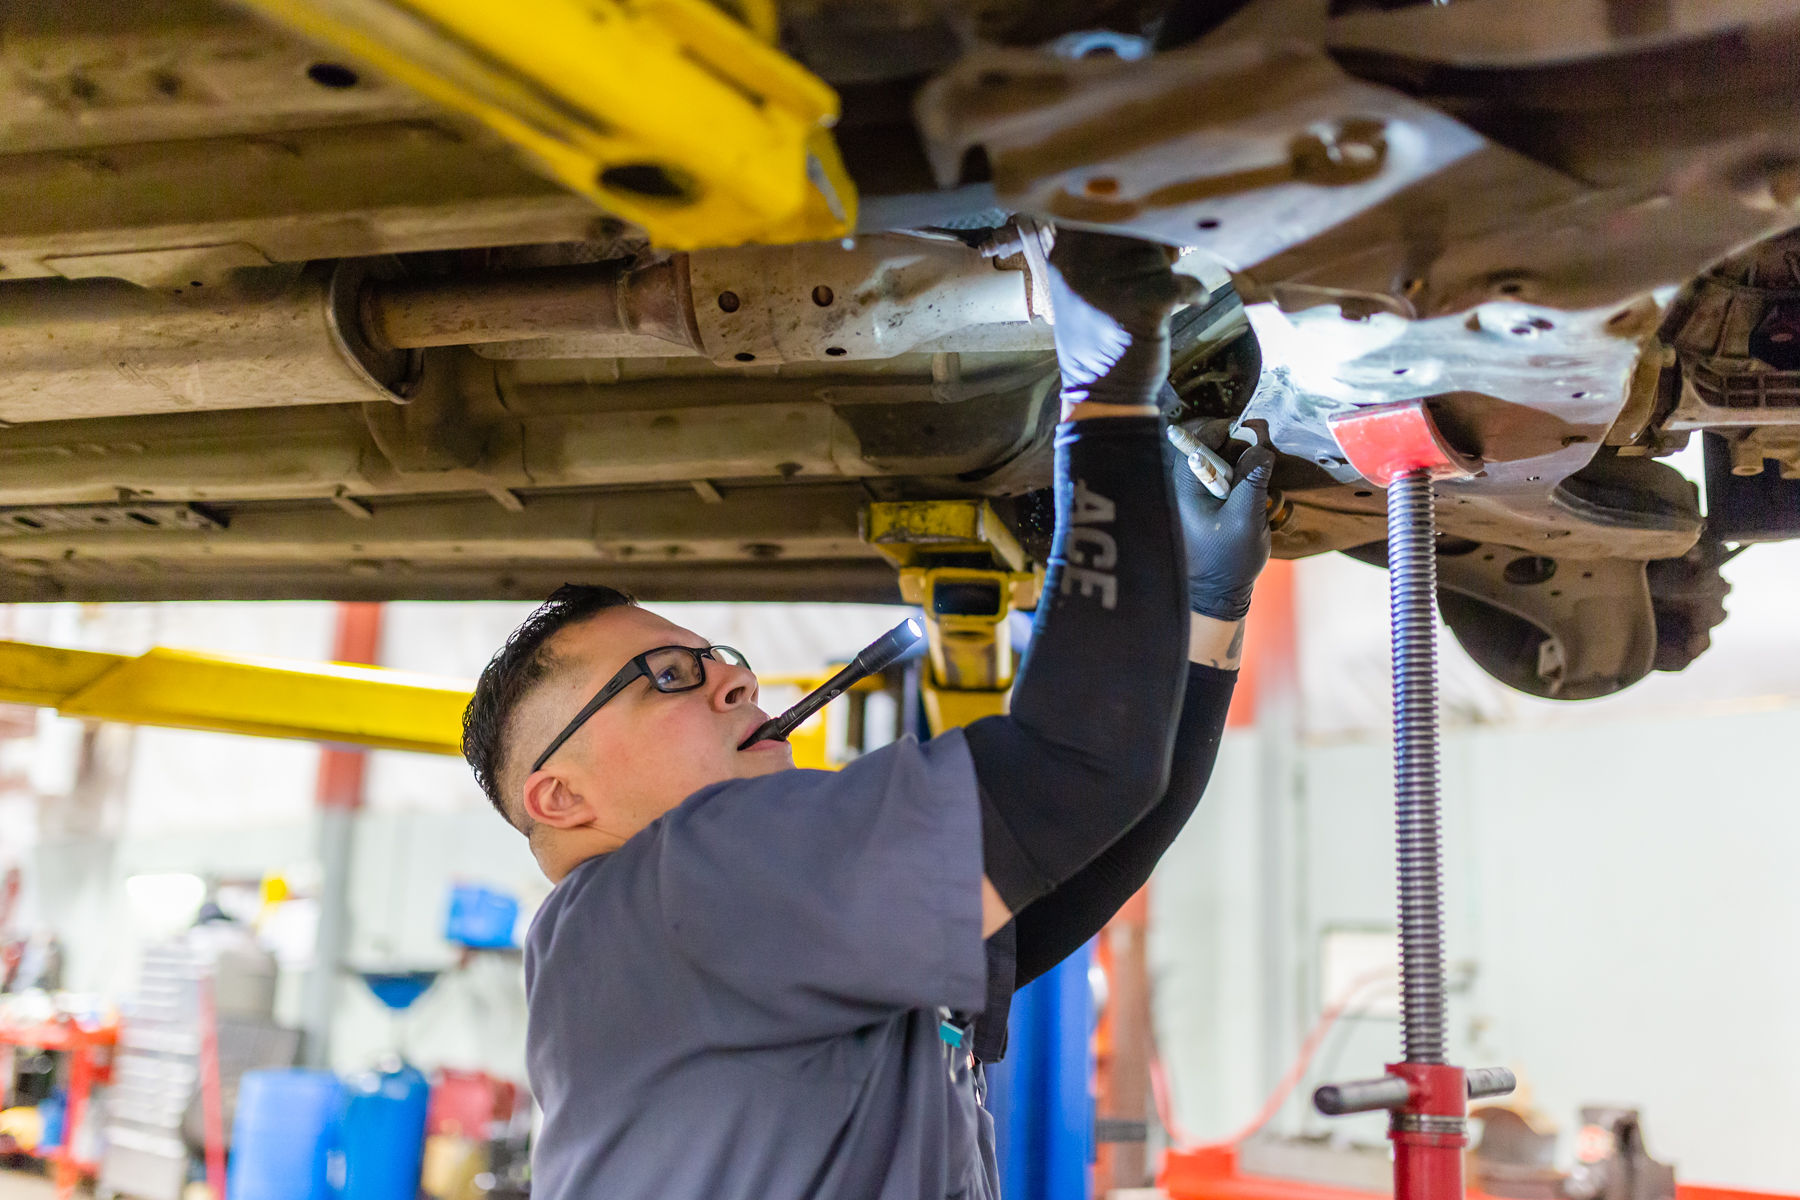 How do you get a Pre-Purchase Inspection before buying a used car?